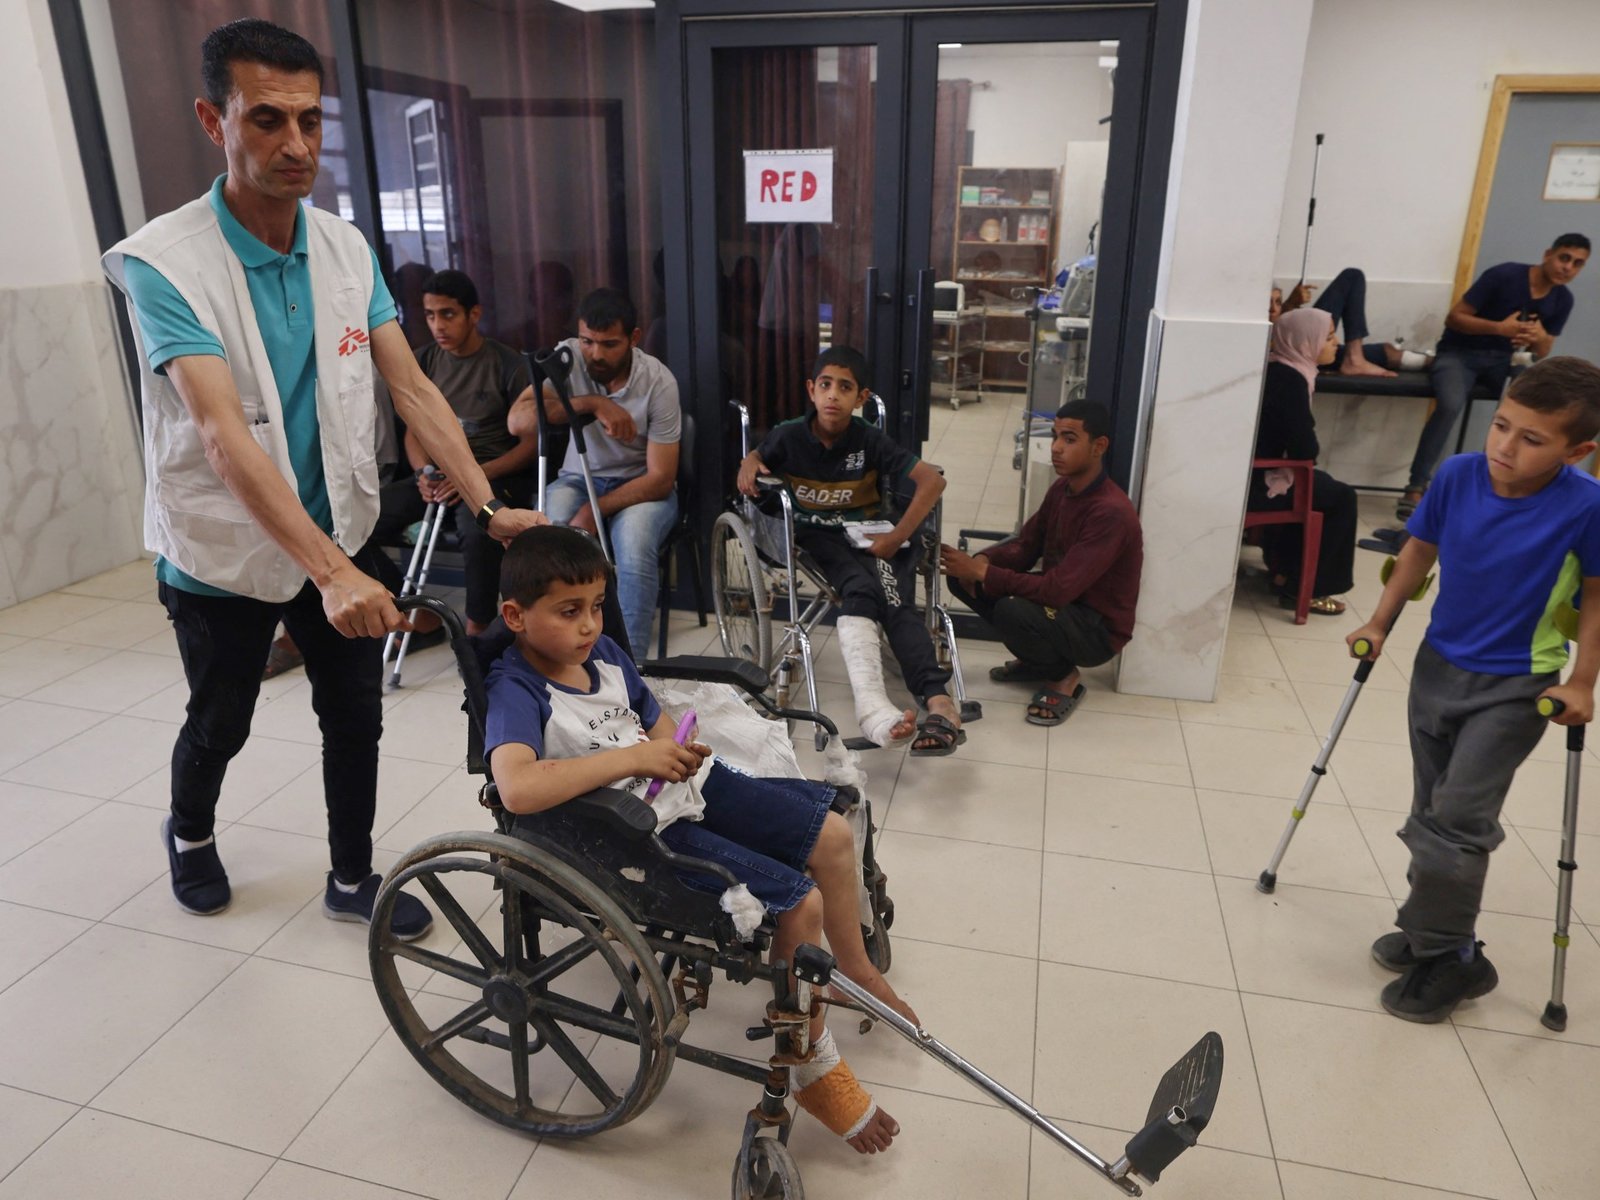 Rafah residents face further danger as Israel hits city’s two hospitals | Israel-Palestine conflict News